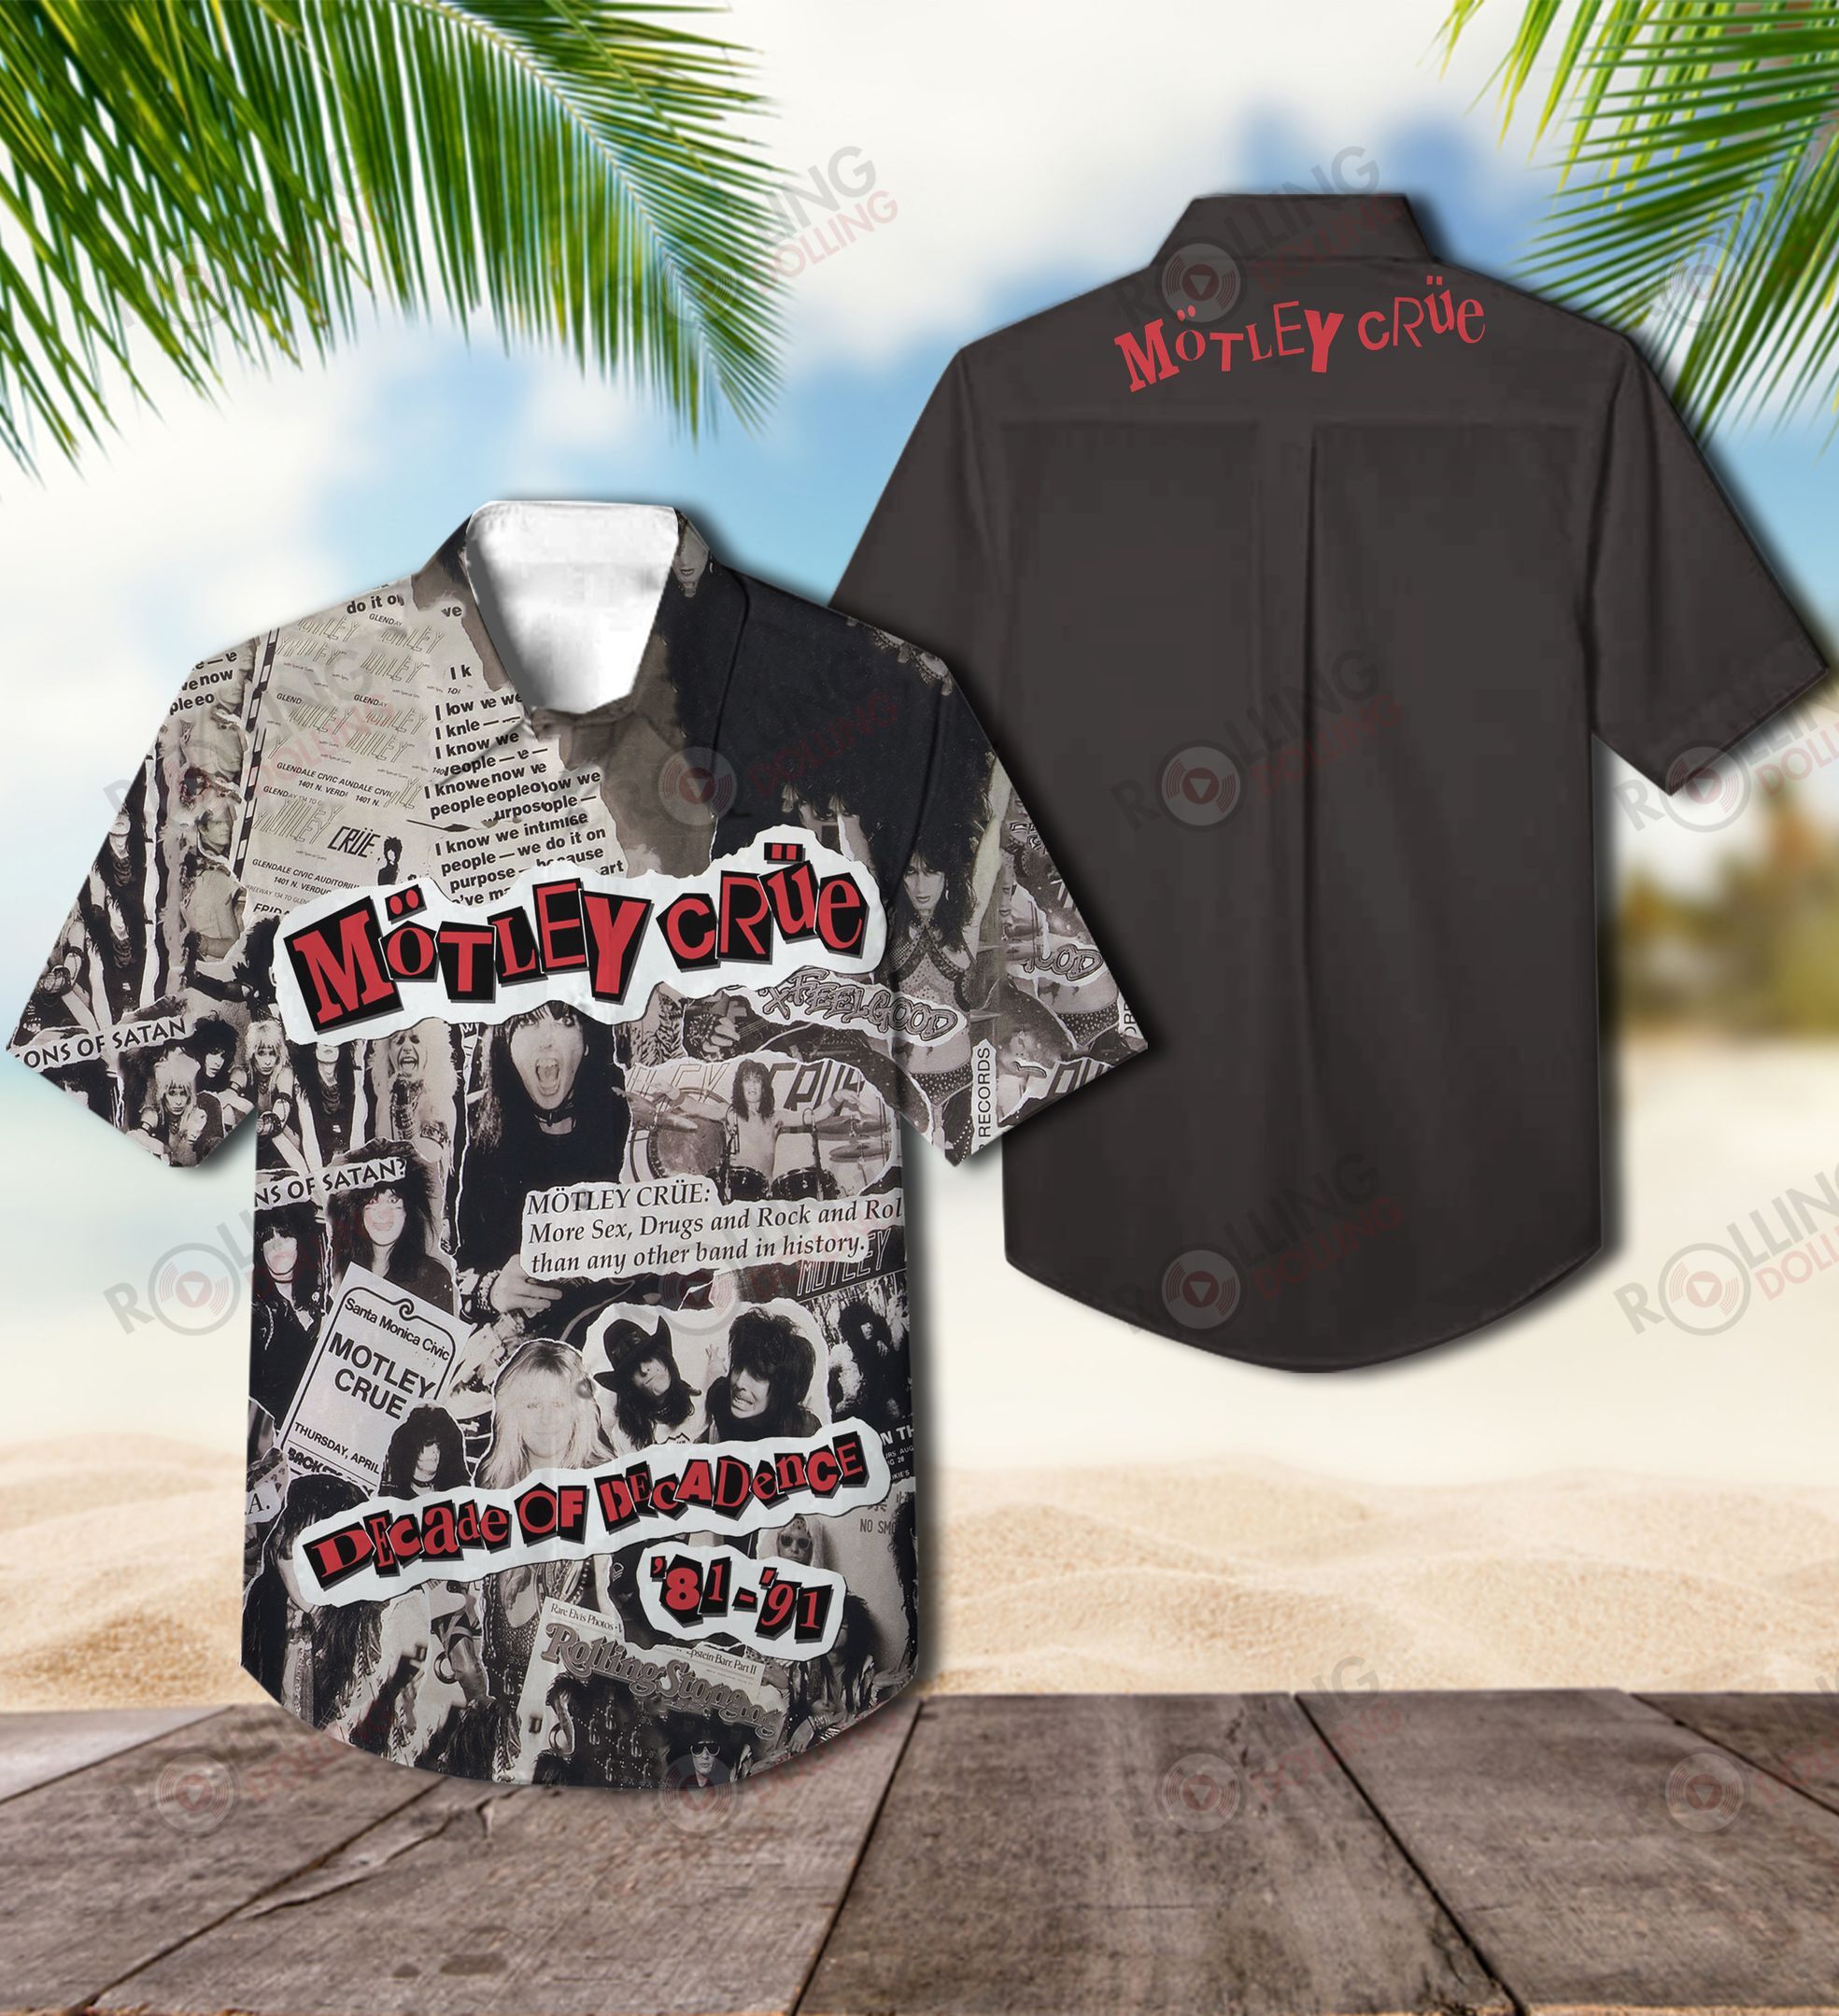 For summer, consider wearing This Amazing Hawaiian Shirt shirt in our store 52